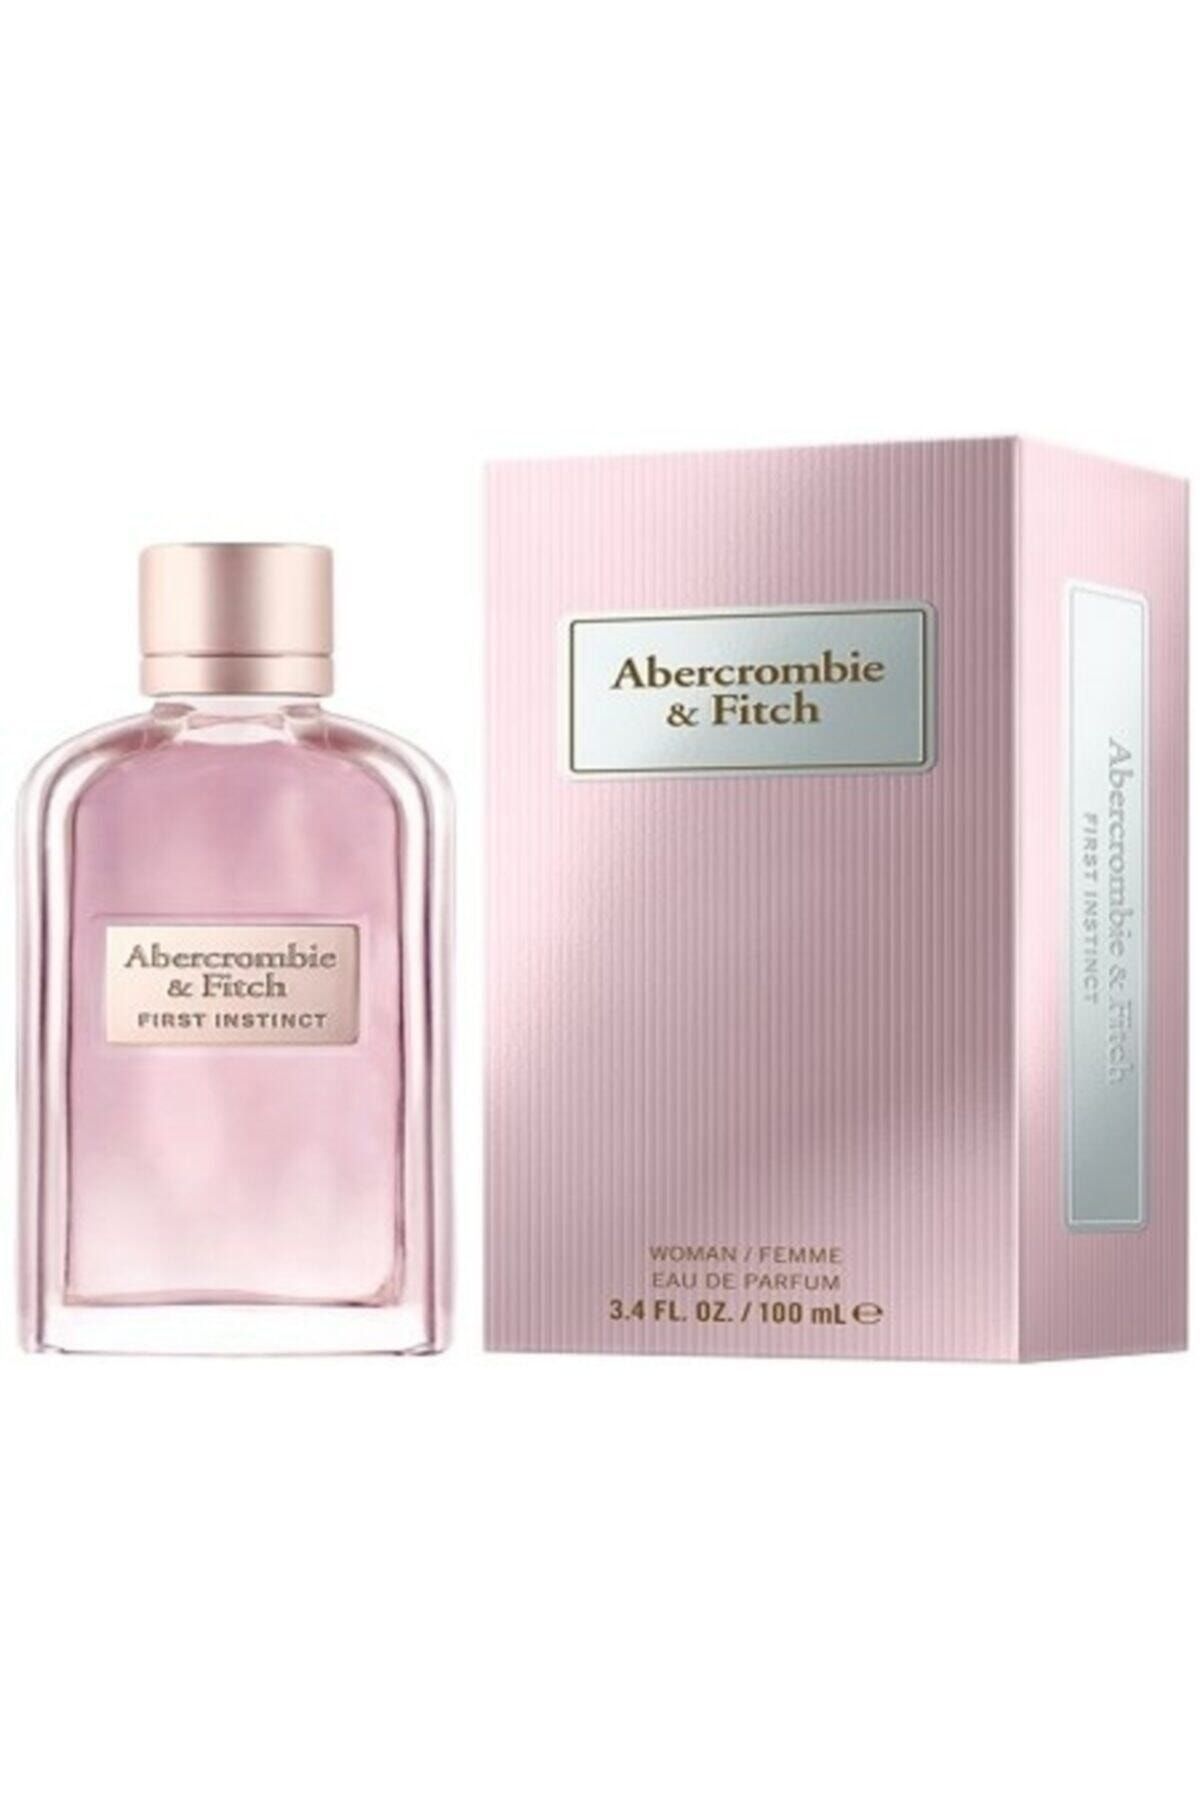 Фитч отзывы. Abercrombie & Fitch first Instinct woman 30 мл. Духи Abercrombie Fitch first Instinct. Духи Abercrombie Fitch first Instinct 100мл. Abercrombie Fitch first Instinct for her.